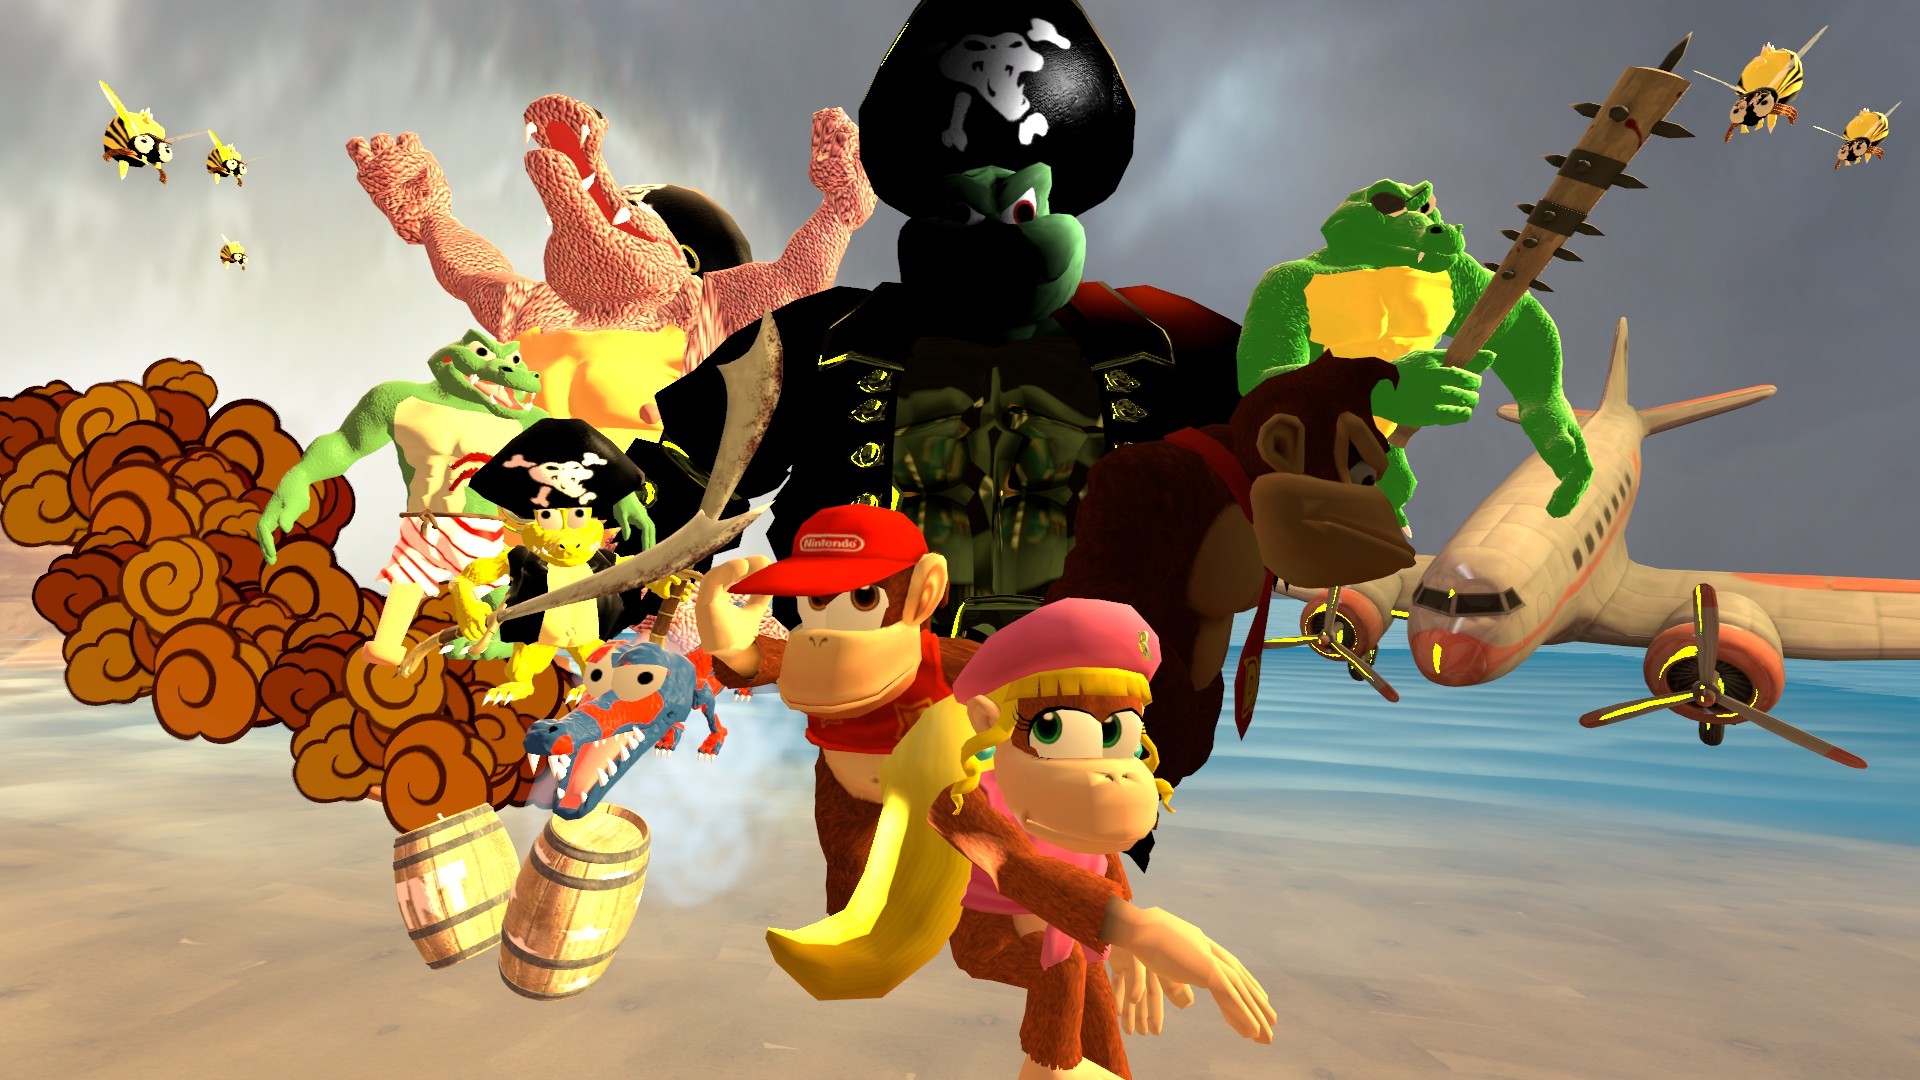 1920x1080 Donkey Kong Country 2 by Sonosublime Donkey Kong Country 2 by Sonosublime